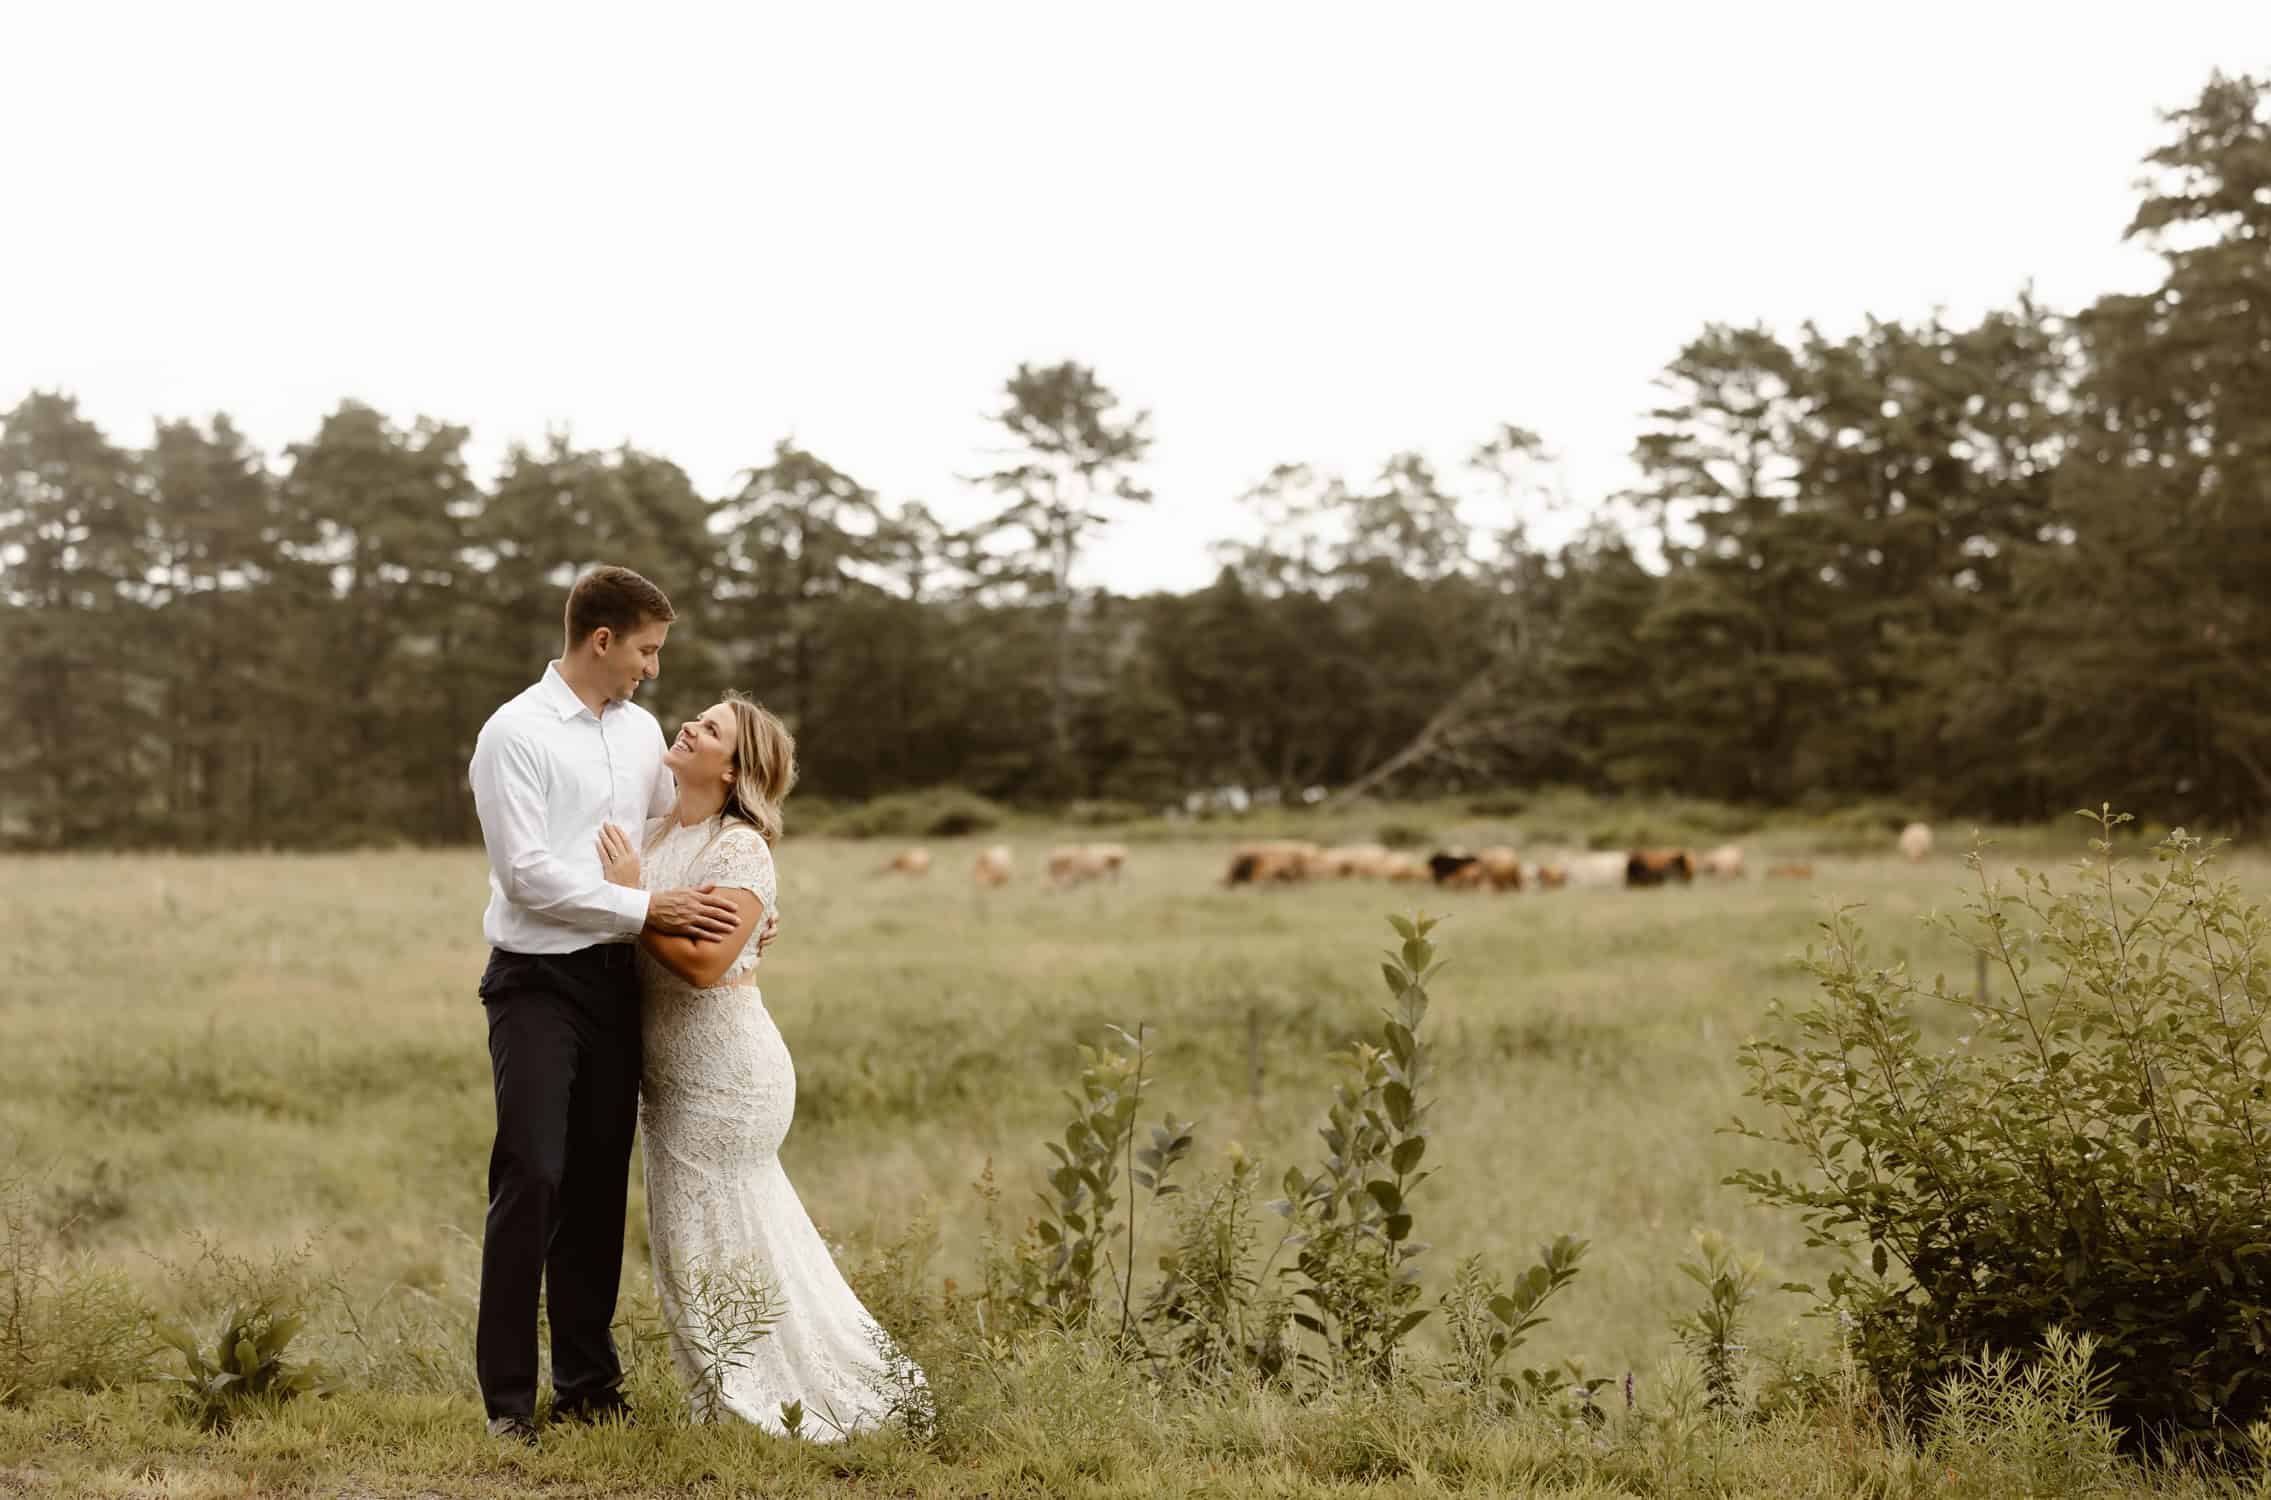 A couple standing in front of a field of cows, embracing each other after their elopement in Freeport.